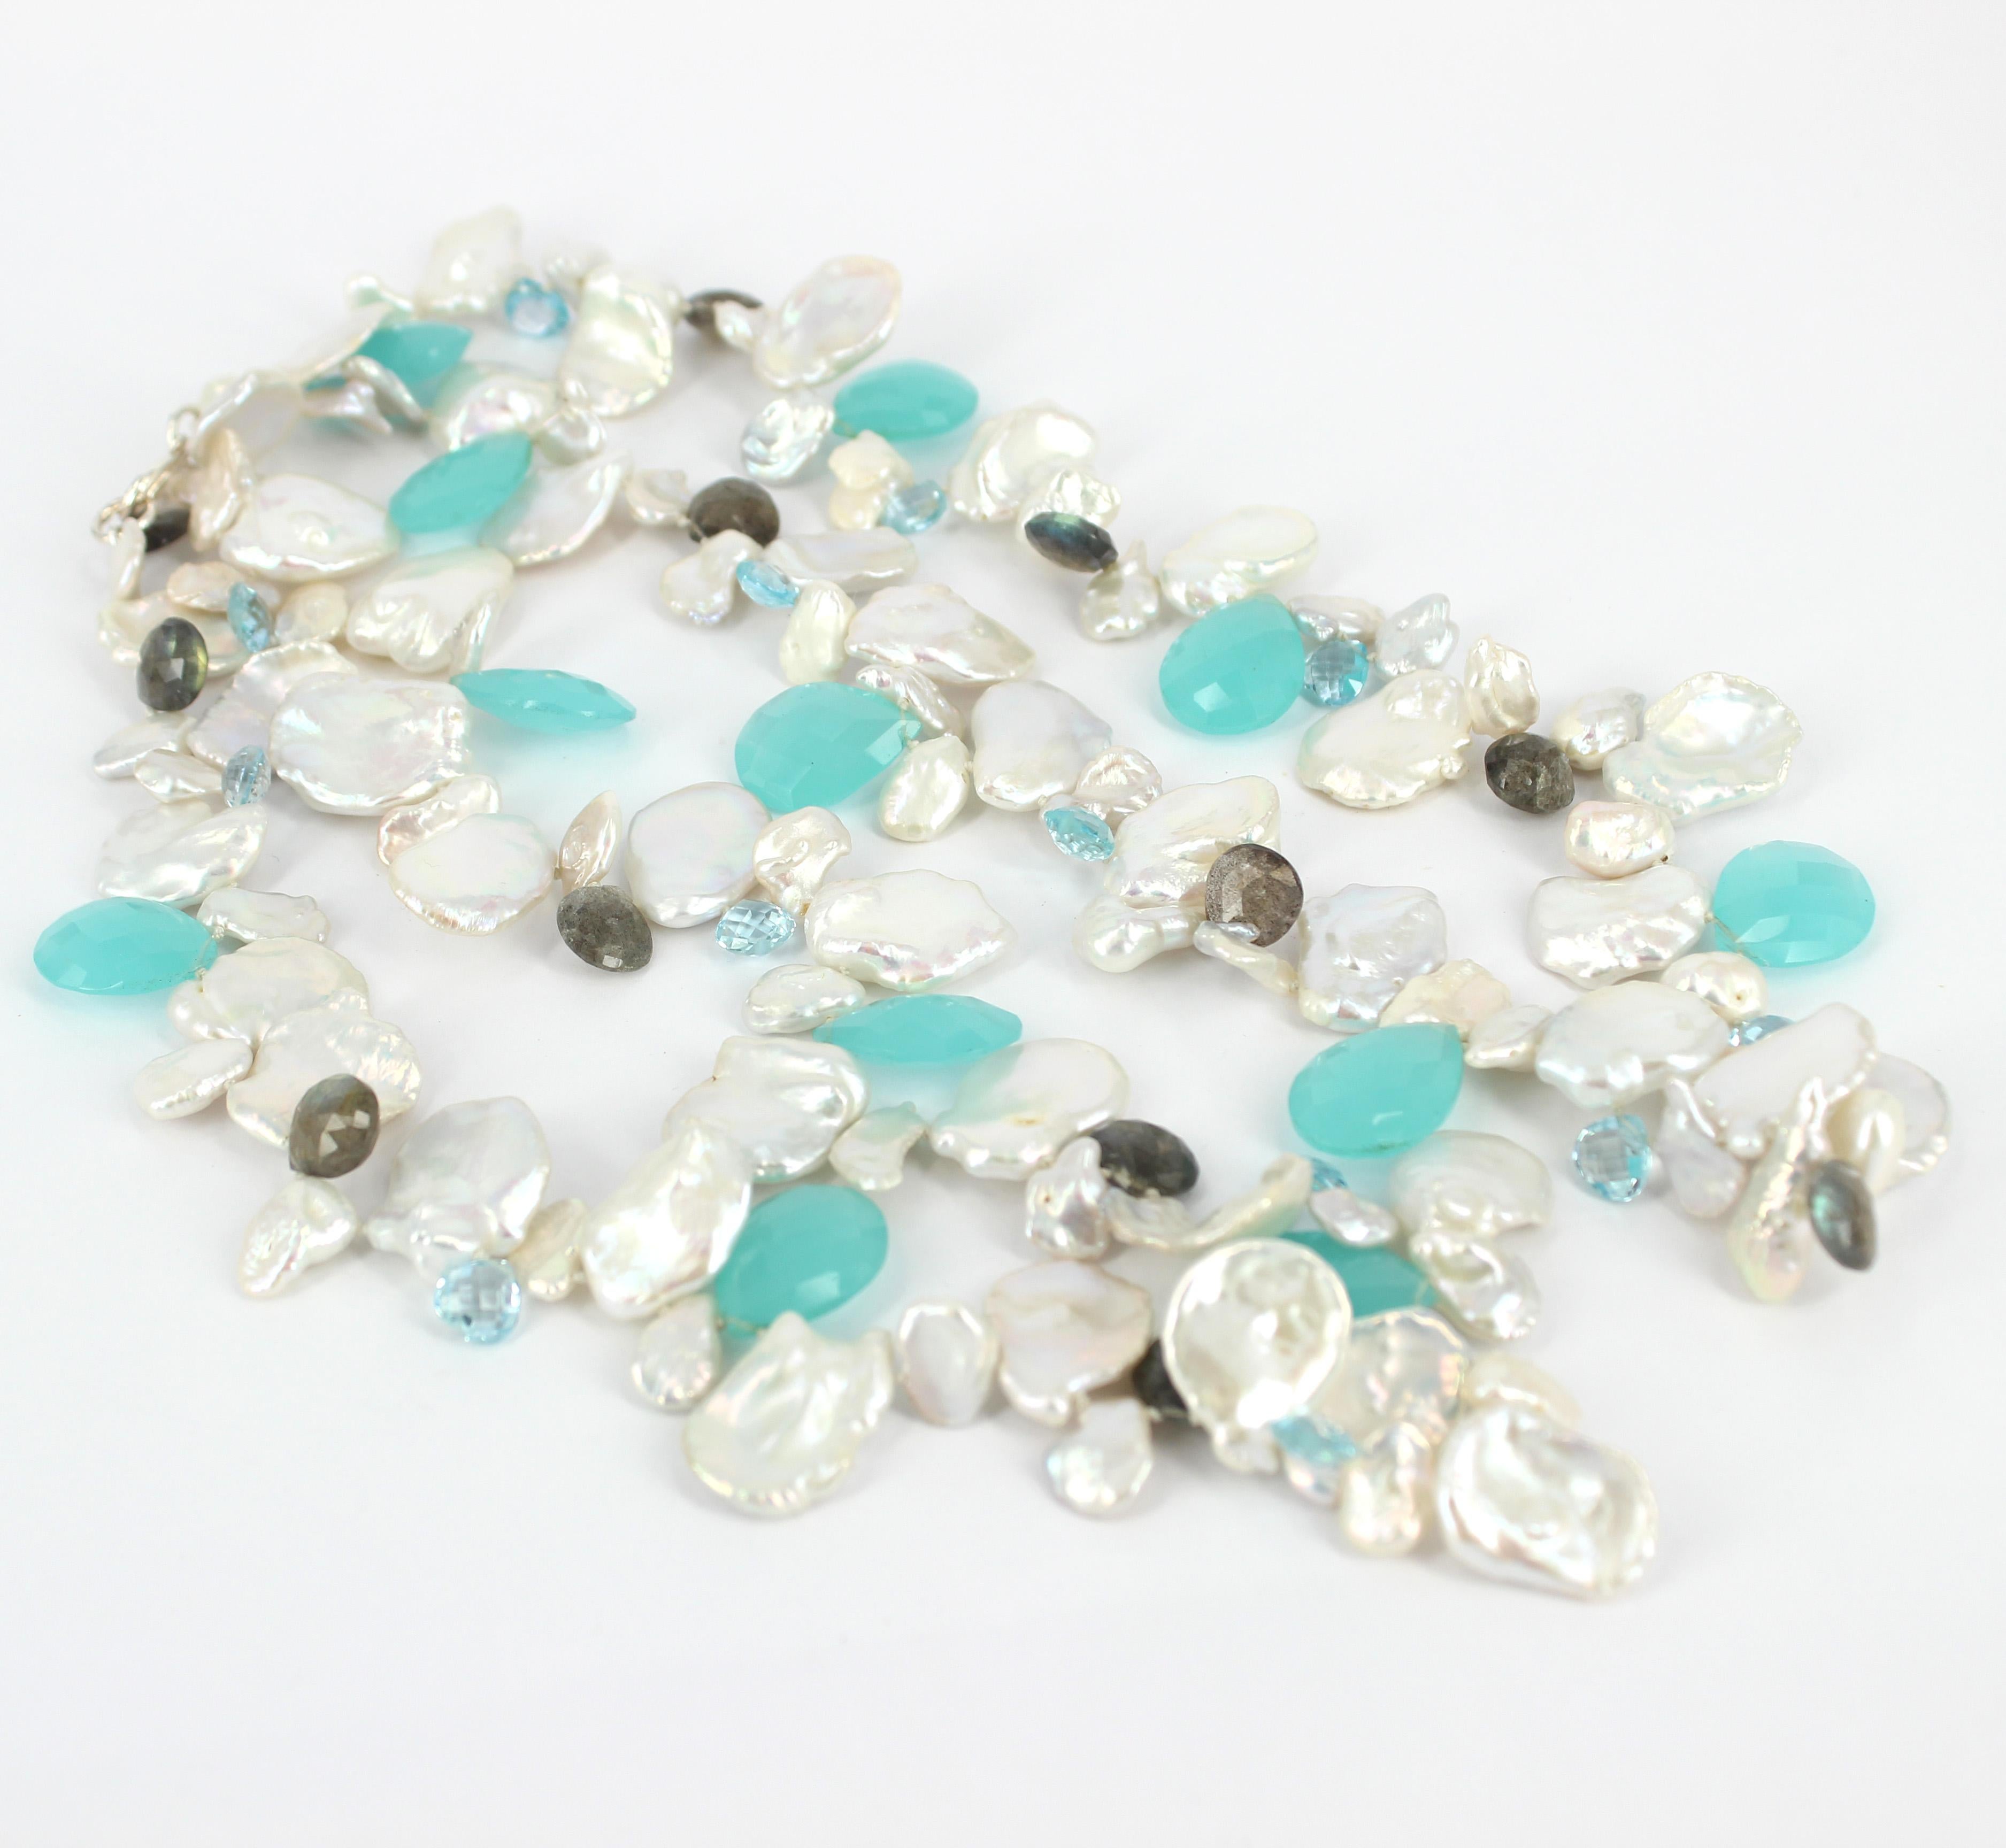 Modern Decadent Jewels Keshi Pearl Blue Topaz Labradorite Chalcedony Silver Necklace For Sale